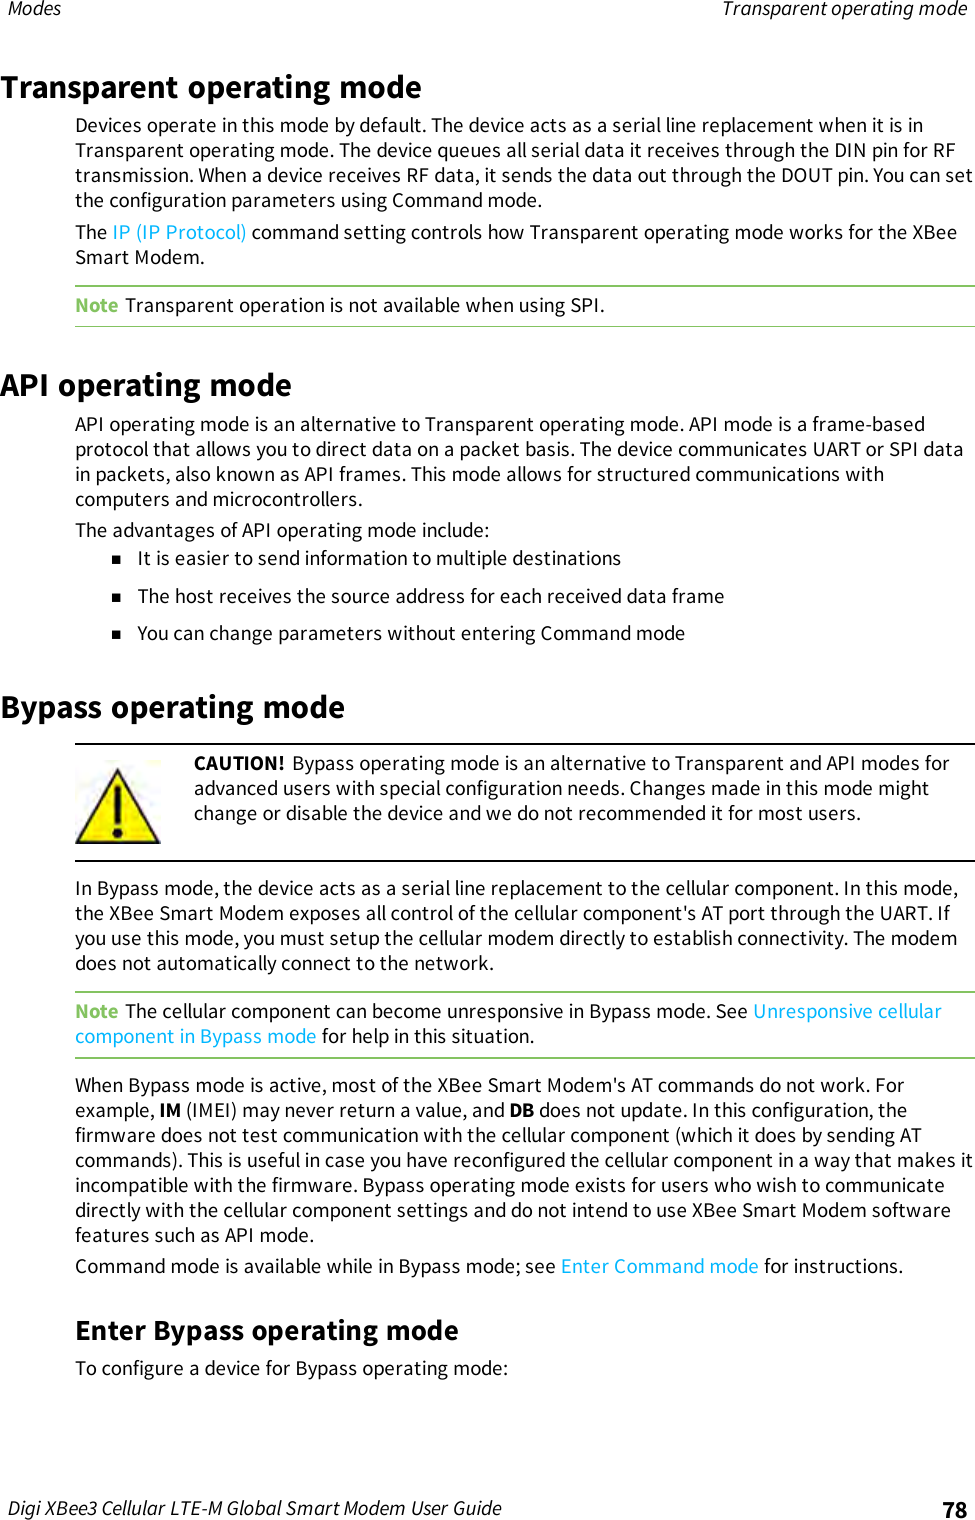 Page 78 of Digi XB3M1 XBee3 Cellular LTE-M User Manual 